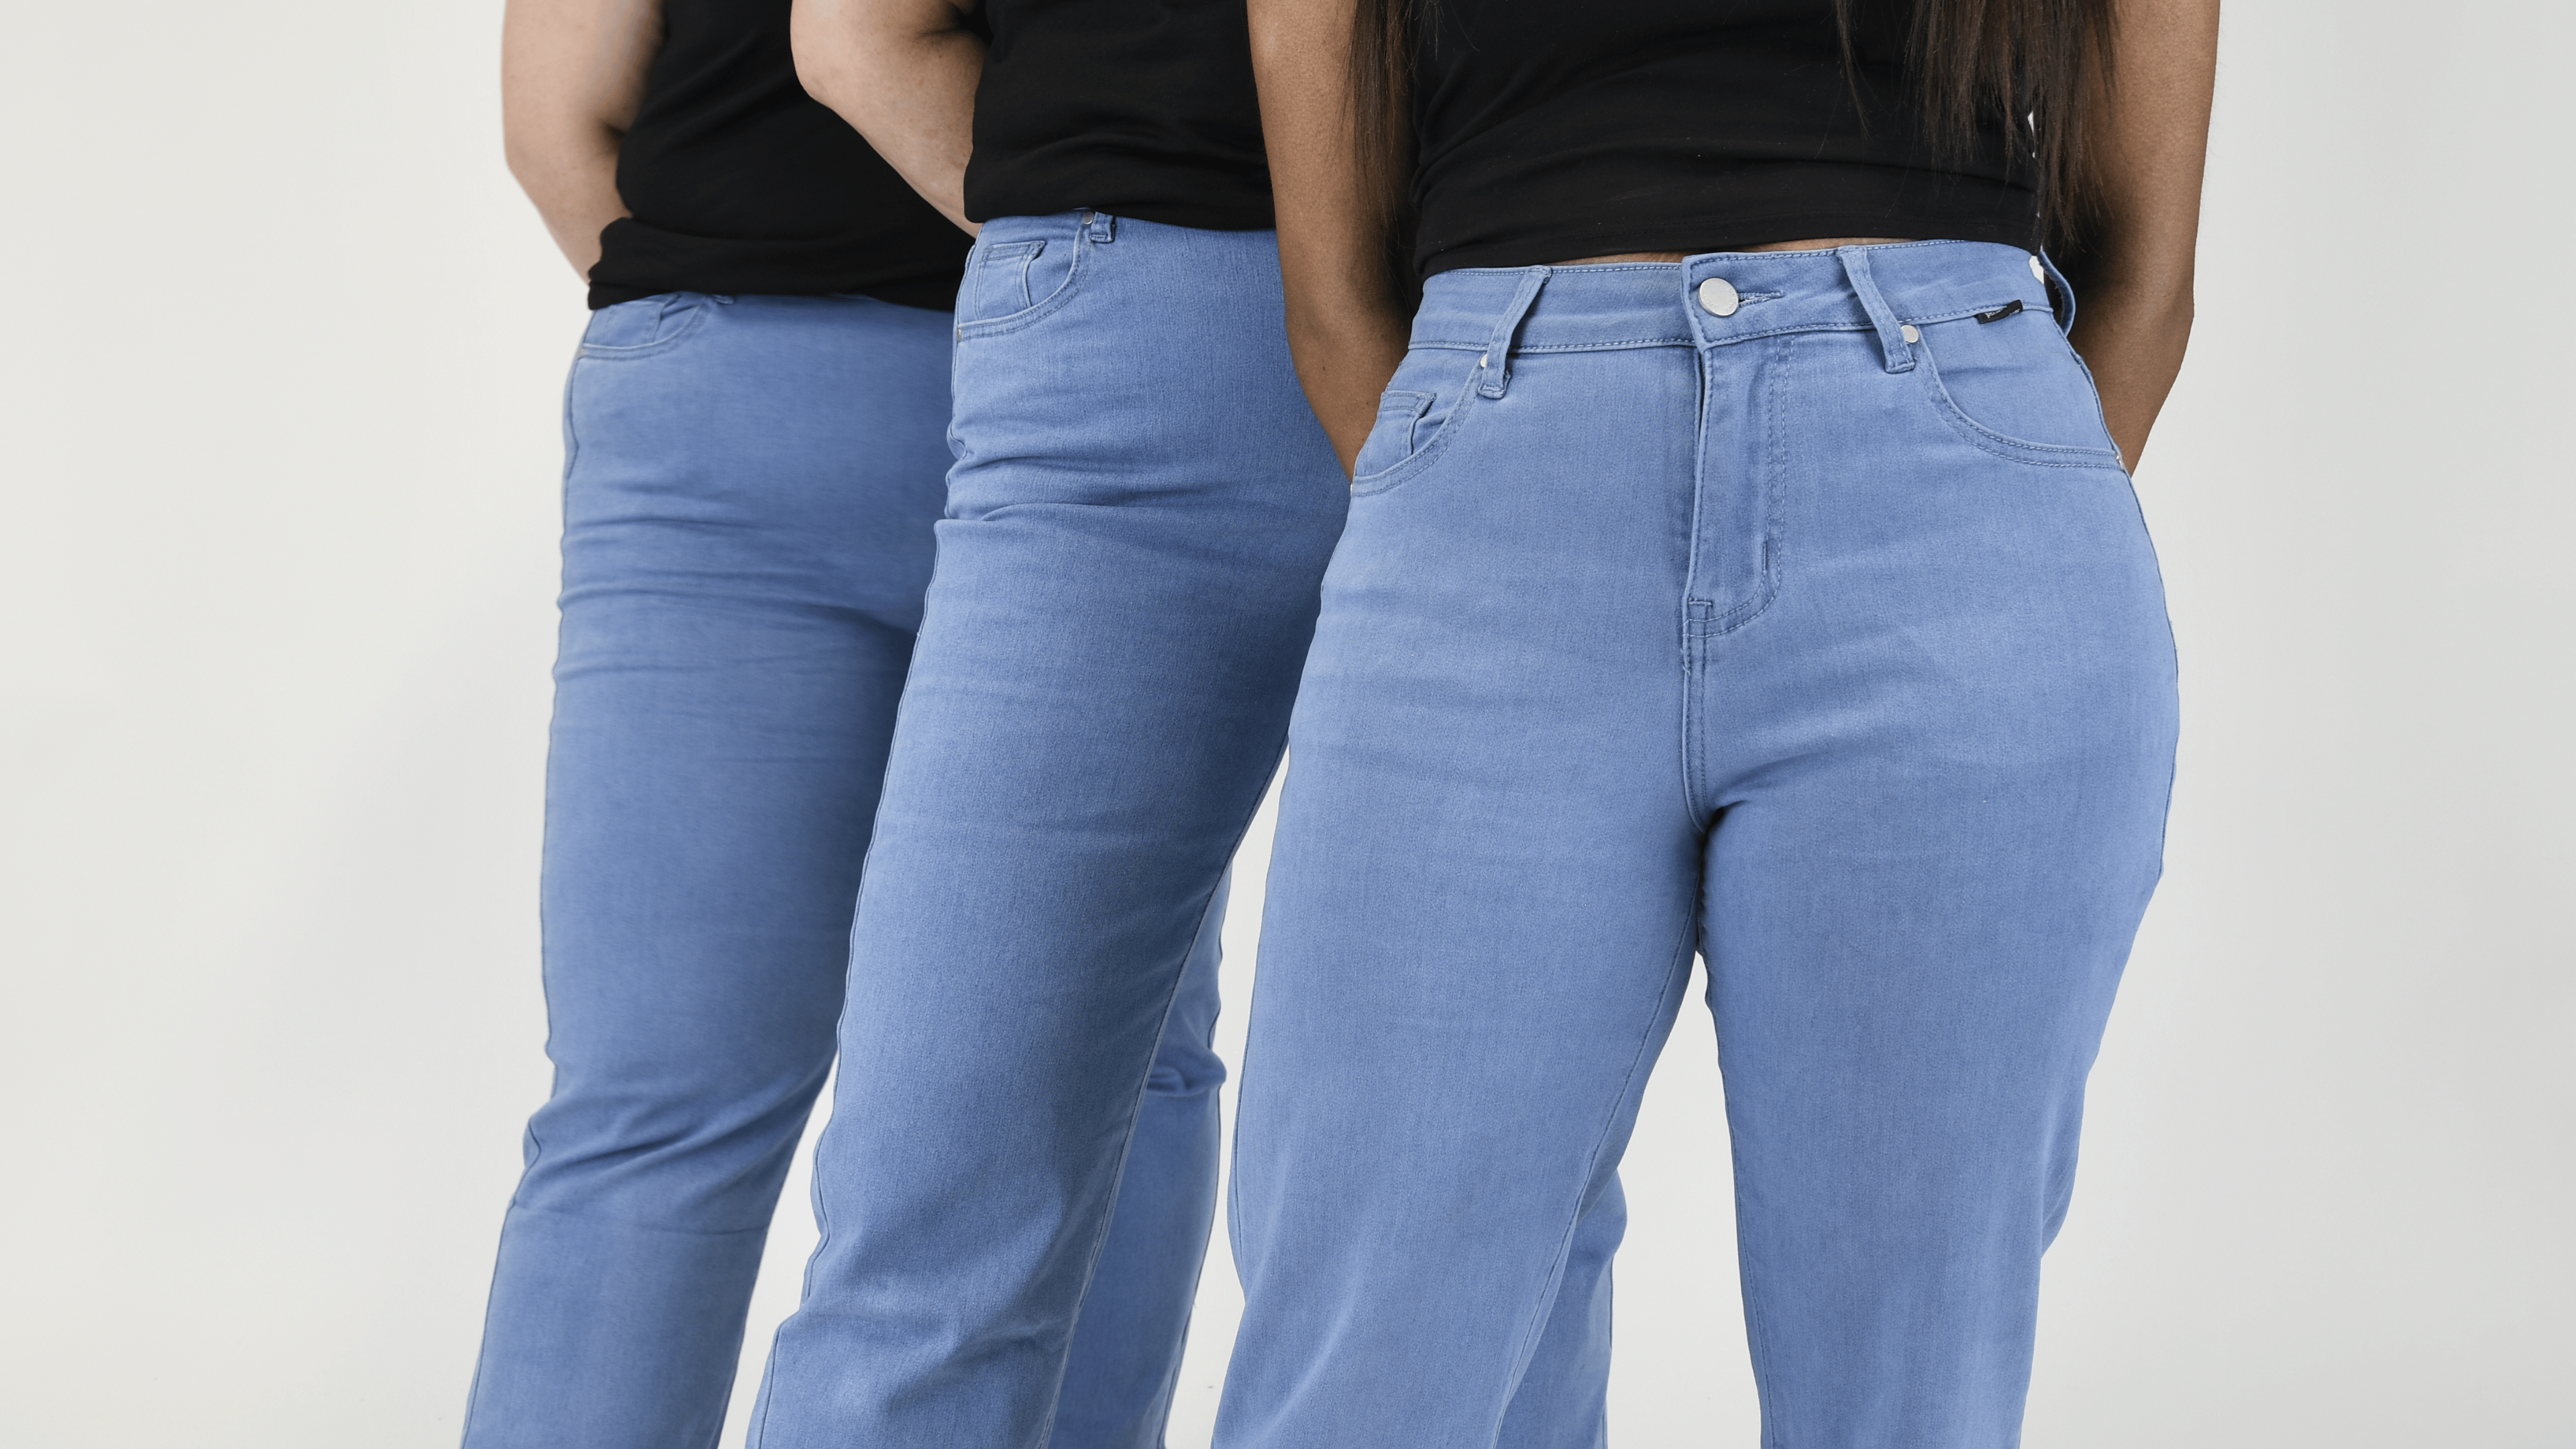 fysiker manuskript klassisk Jeans for women: Find the perfect pair of jeans for your body type –  Perfect Jeans